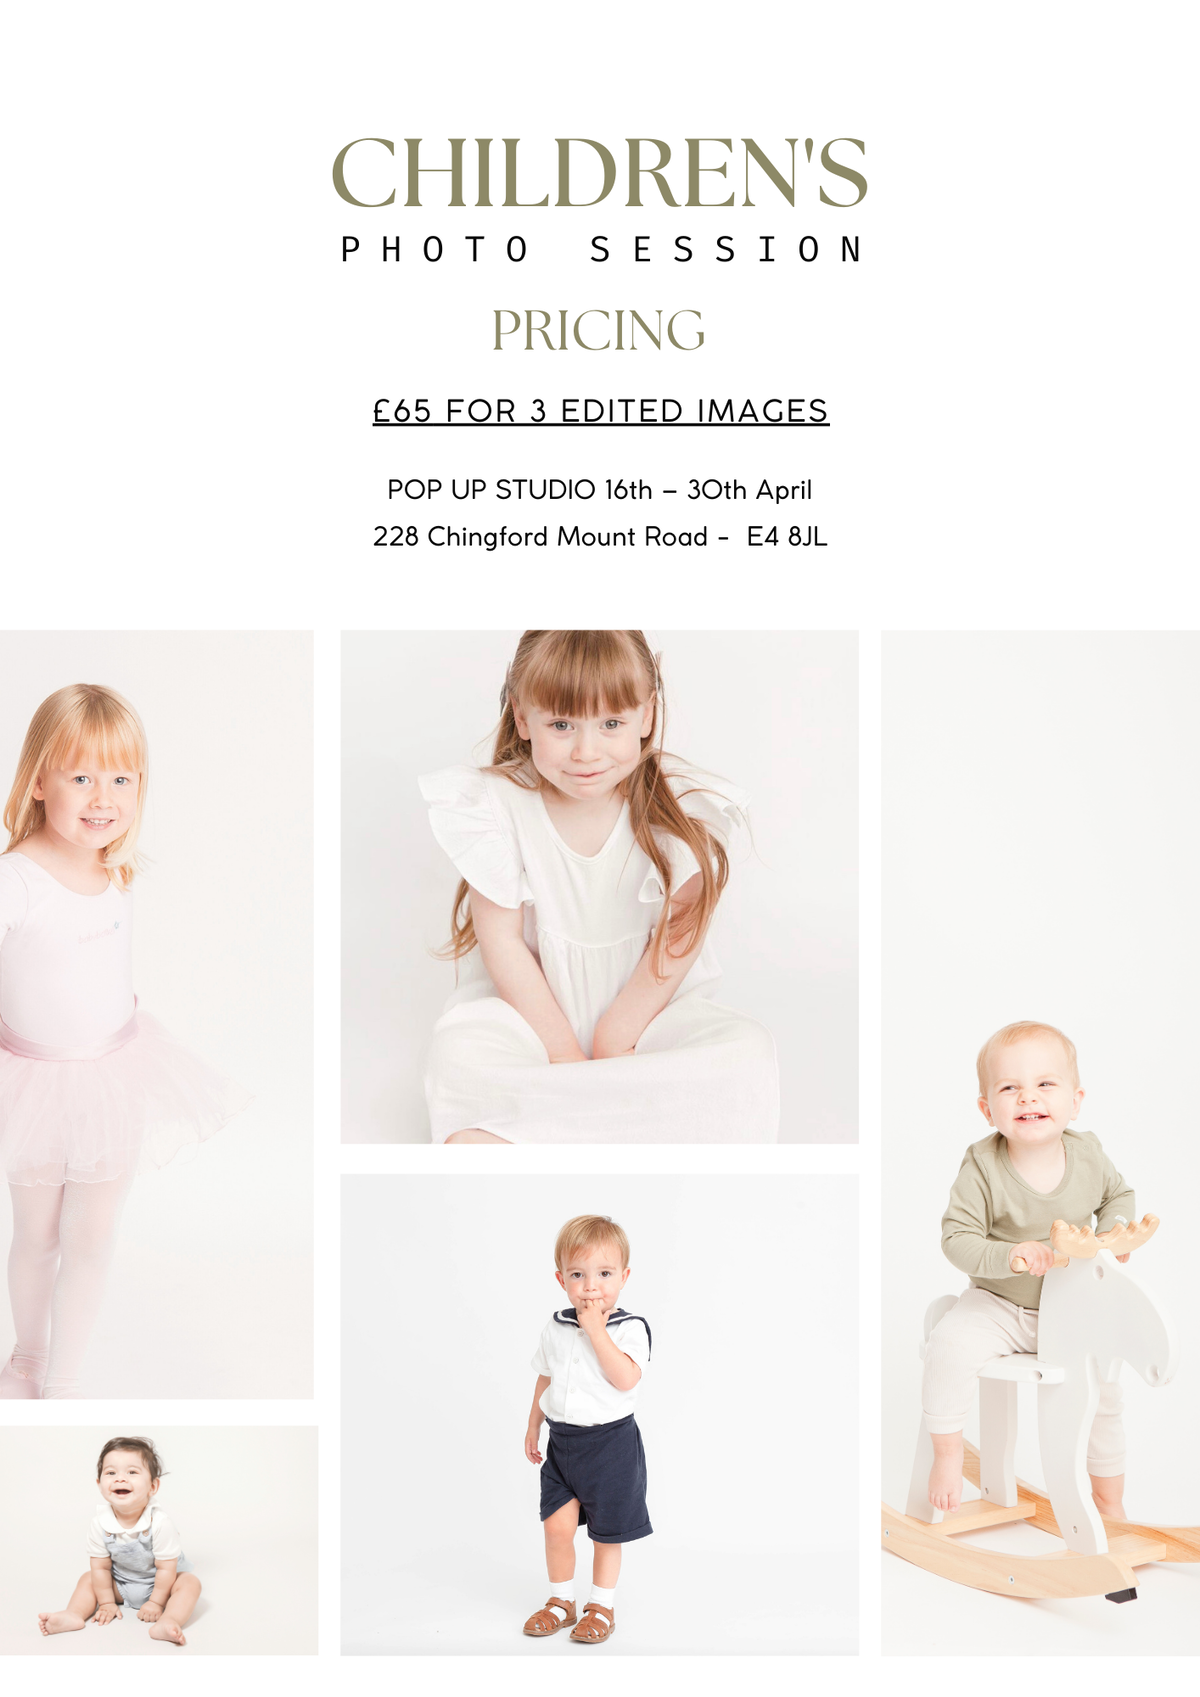 children photography mini session London by petite feet photography in Chingford Mount